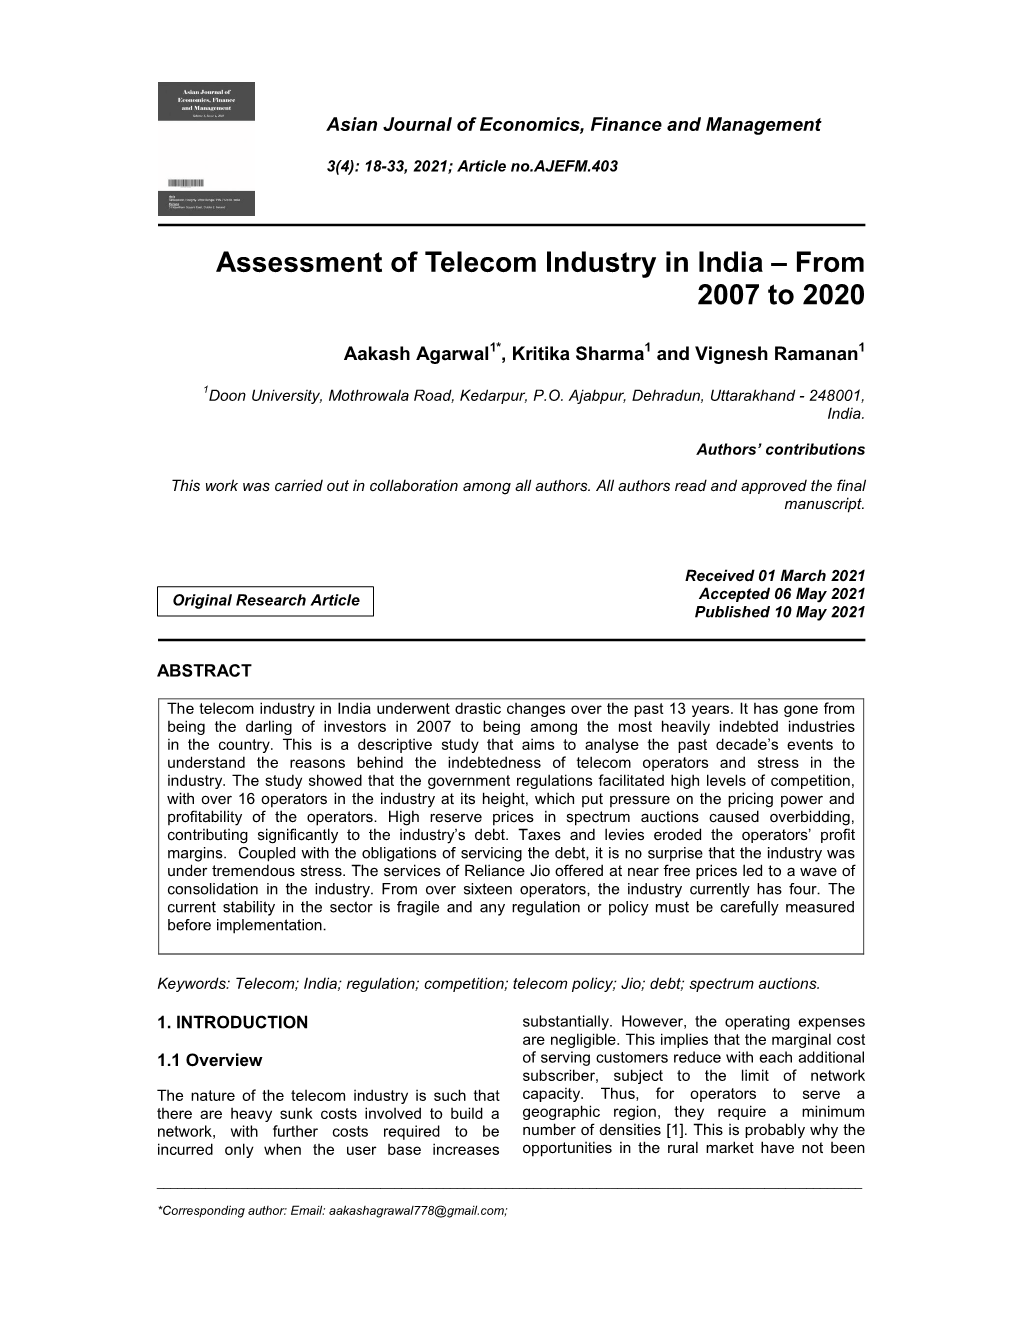 Assessment of Telecom Industry in India – from 2007 to 2020